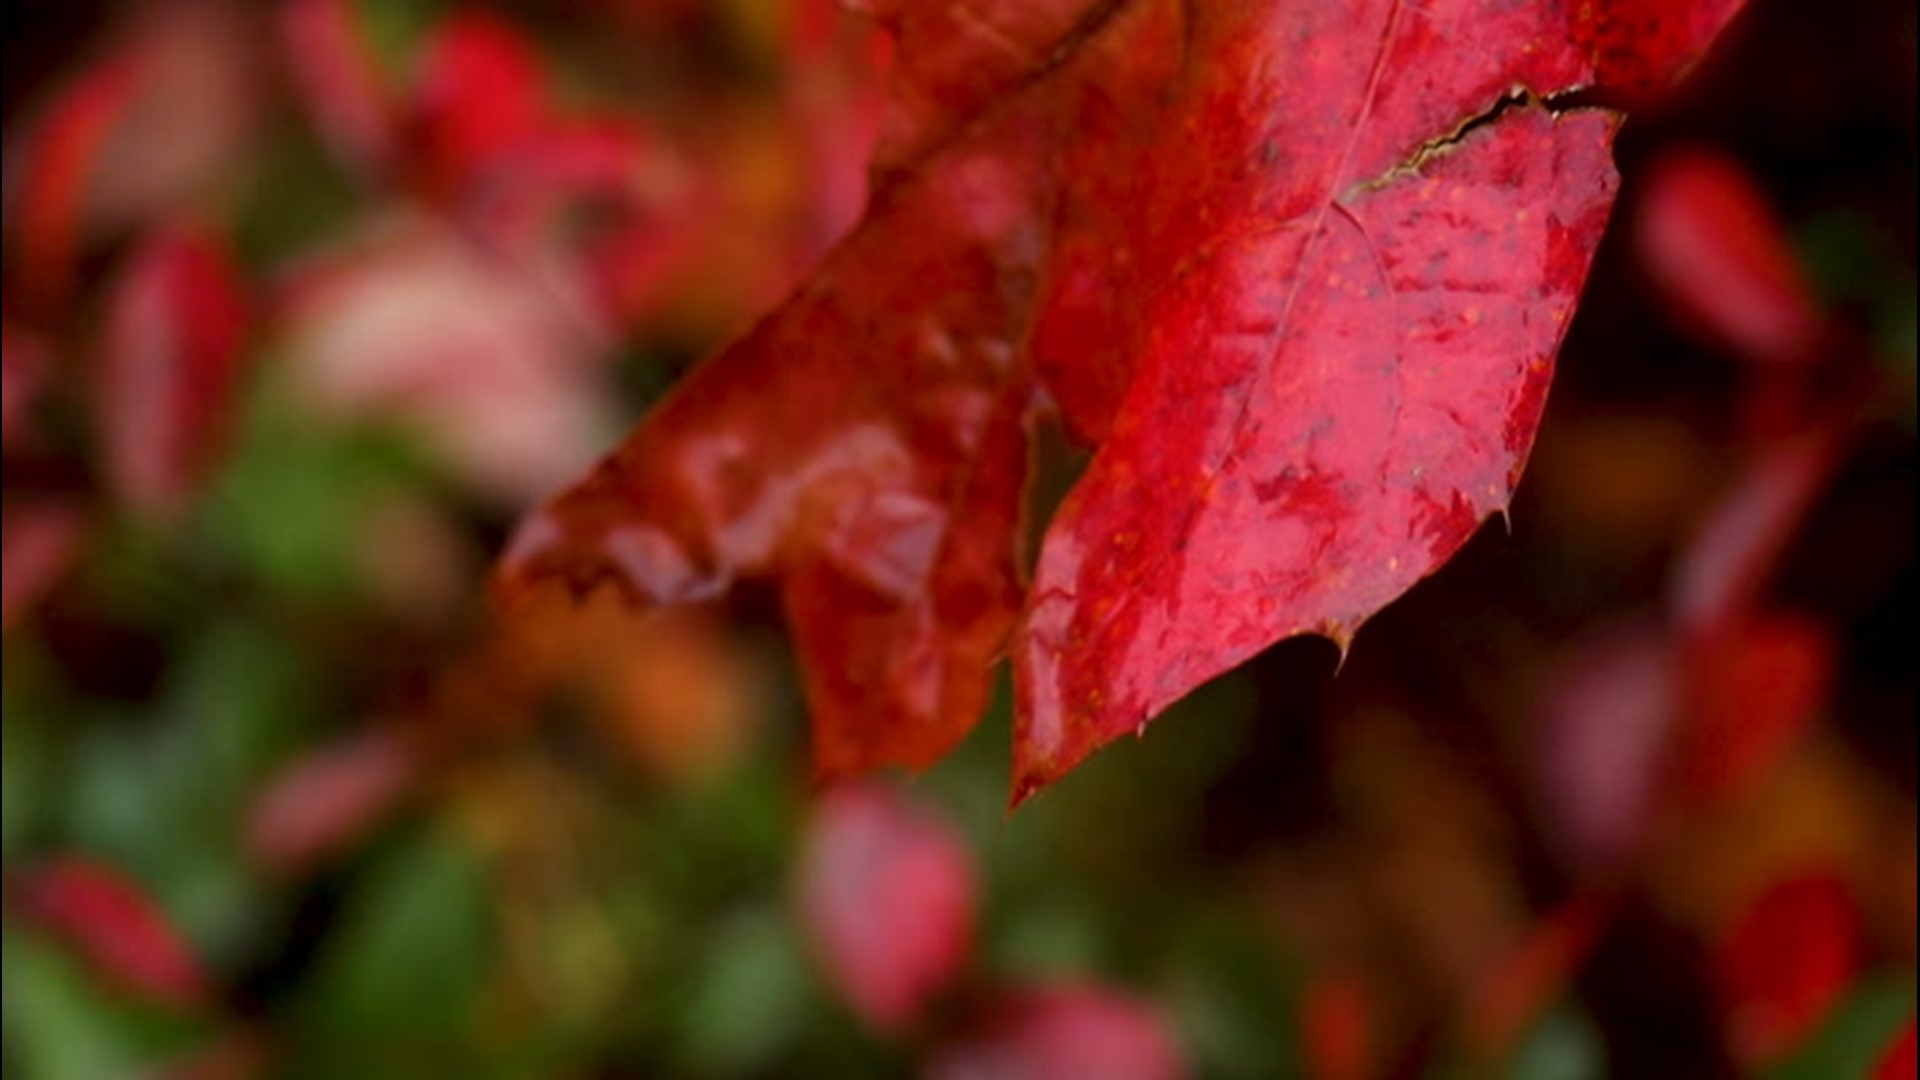 Searching for fall foliage? Pennsylvania may be a safe bet. AccuWeather's Lincoln Riddle has more on what sets the Keystone state apart when it comes to the changing of the leaves.